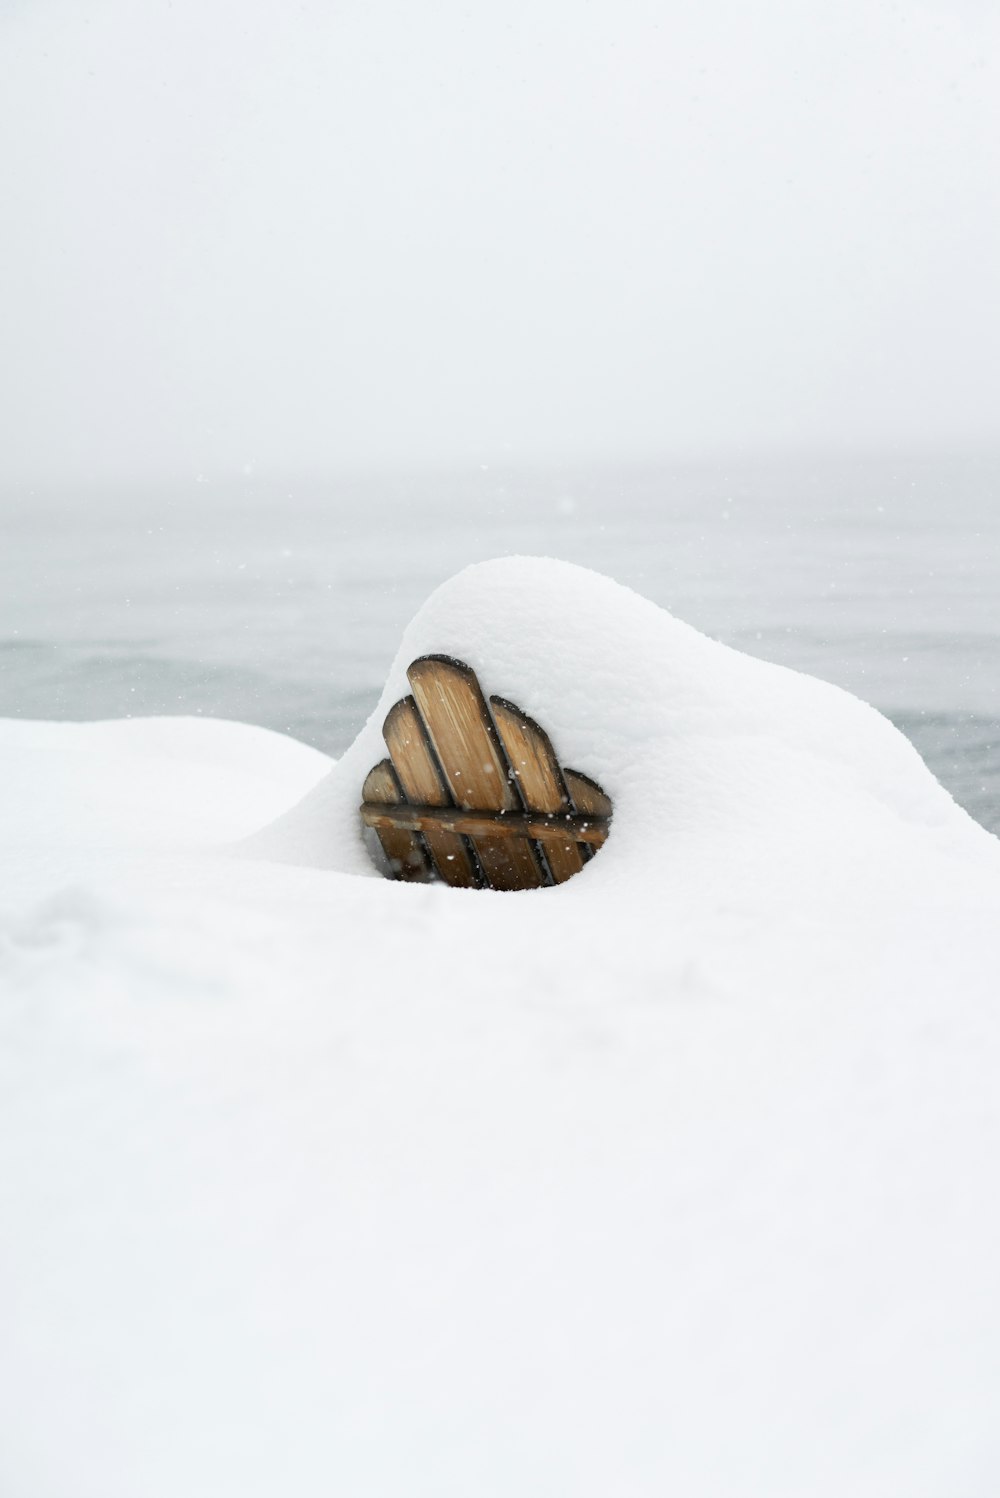 brown wooden log on snow covered ground